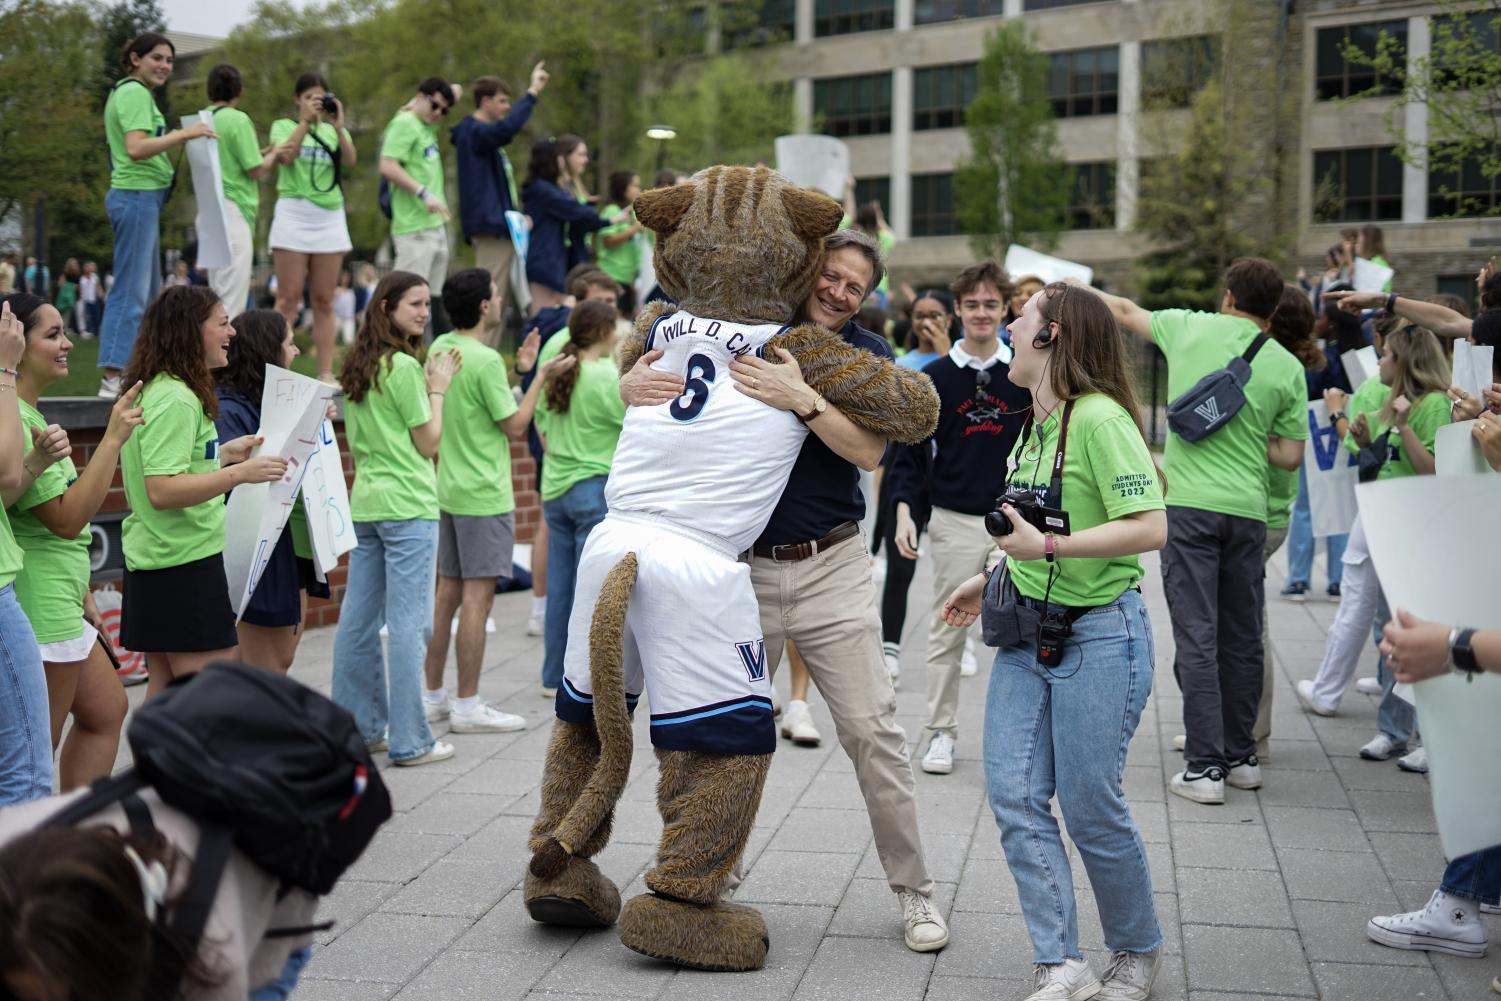 University Hosts Annual Admitted Students’ Day The Villanovan